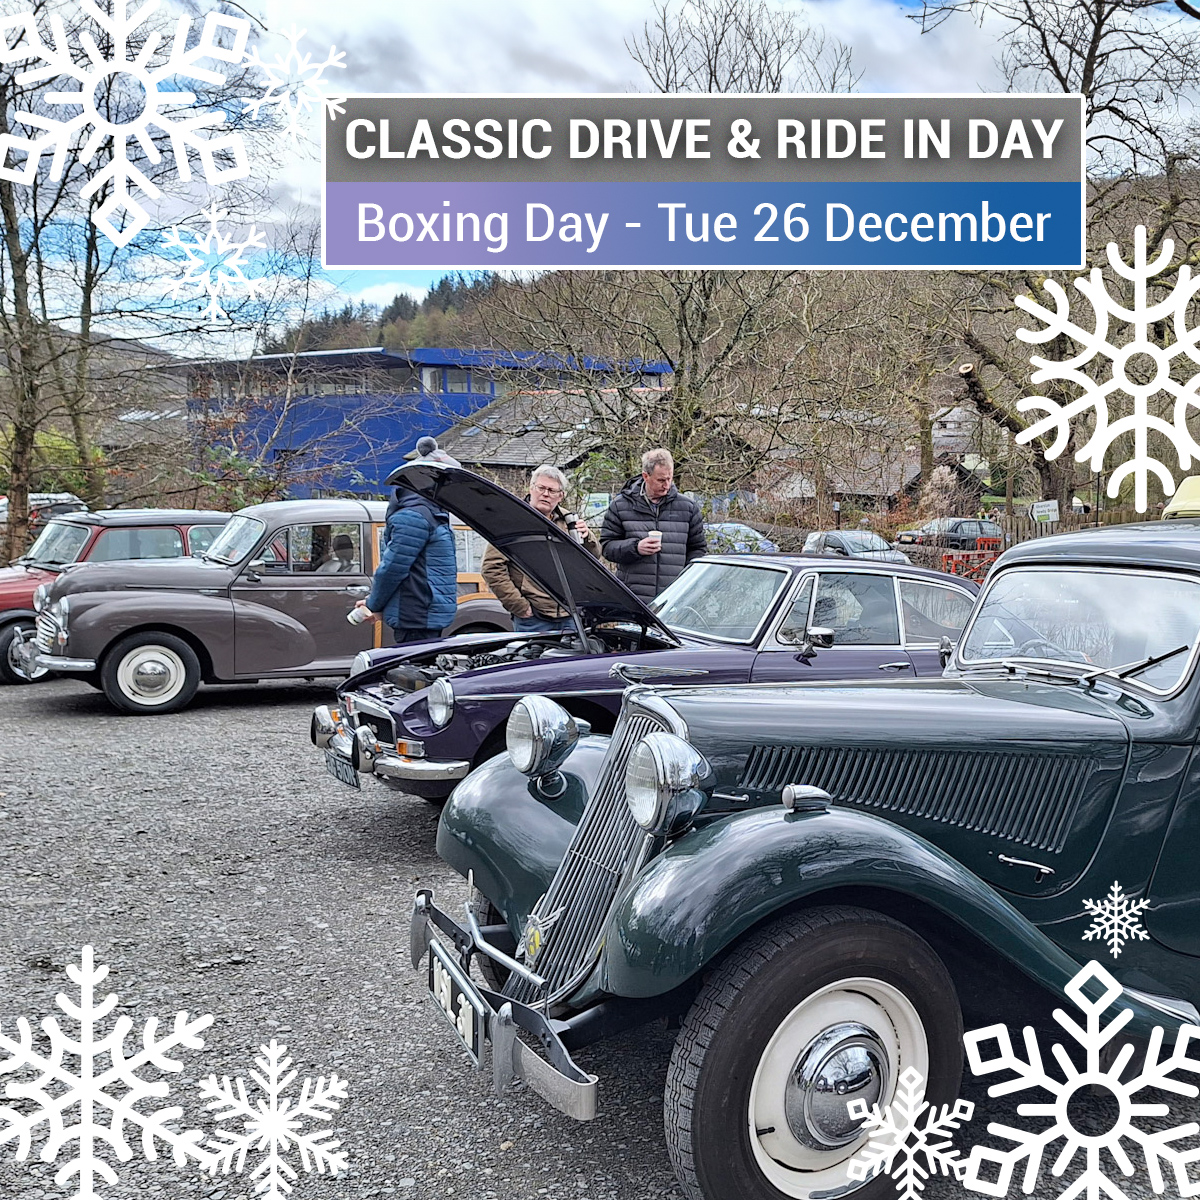 Take a break from all the turkey (or tofu) & tinsel! 

Our Classic Drive & Ride in Day is a great day out for the whole family. 

See you tomorrow > ow.ly/fESz50QlFL4

#LakeDistrictEvents #ClassicCarMeet #ClassicCars